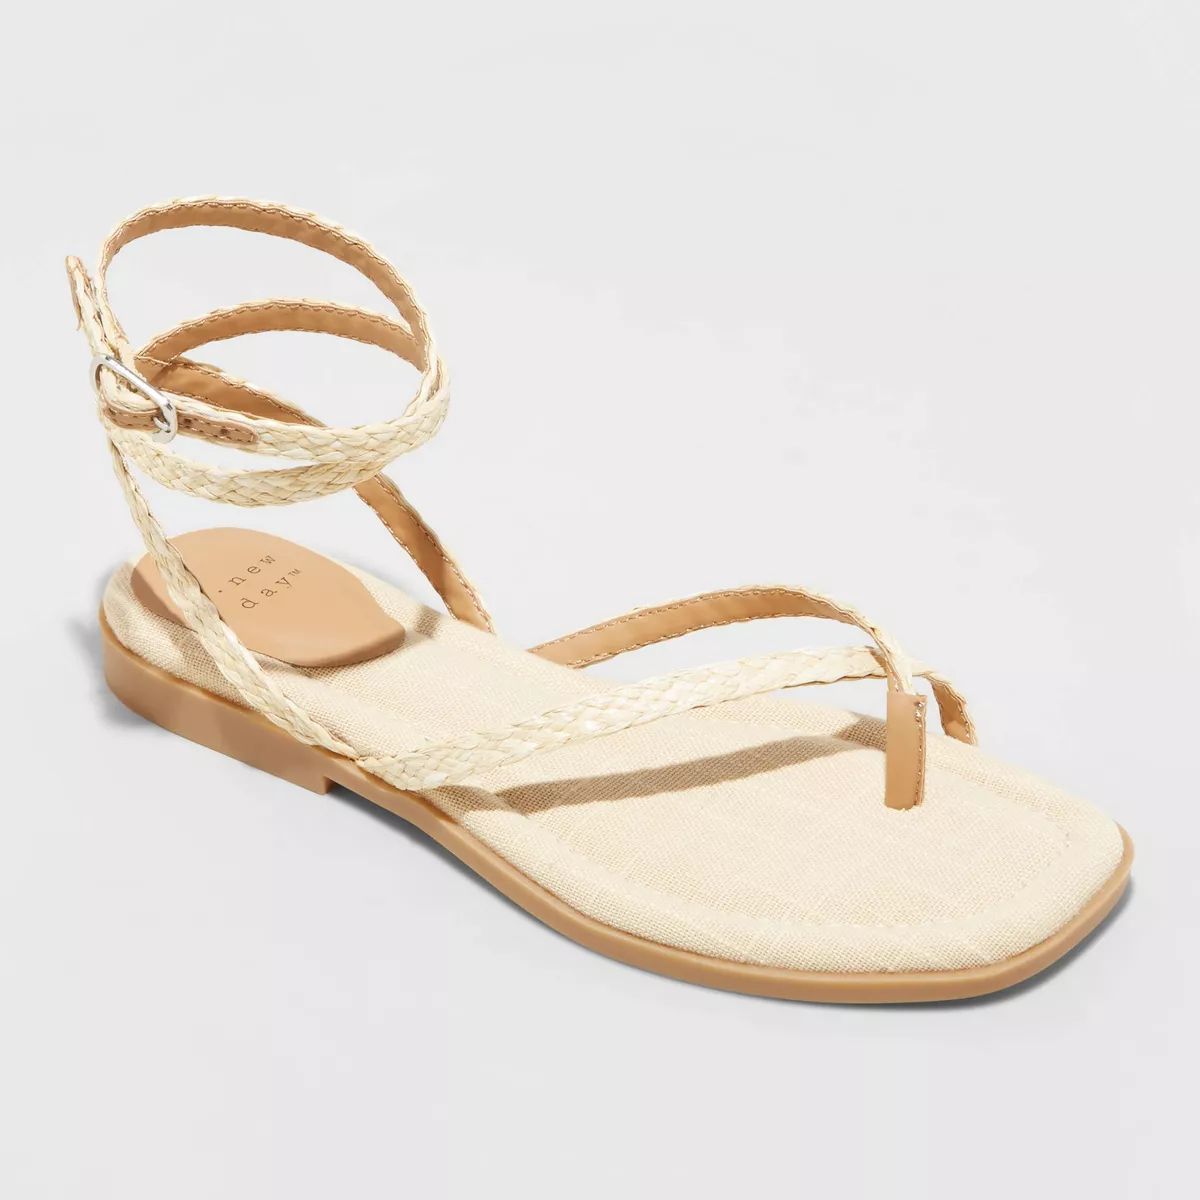 Women's Luisa Ankle Strap Thong Sandals - A New Day™ Beige 9.5 | Target